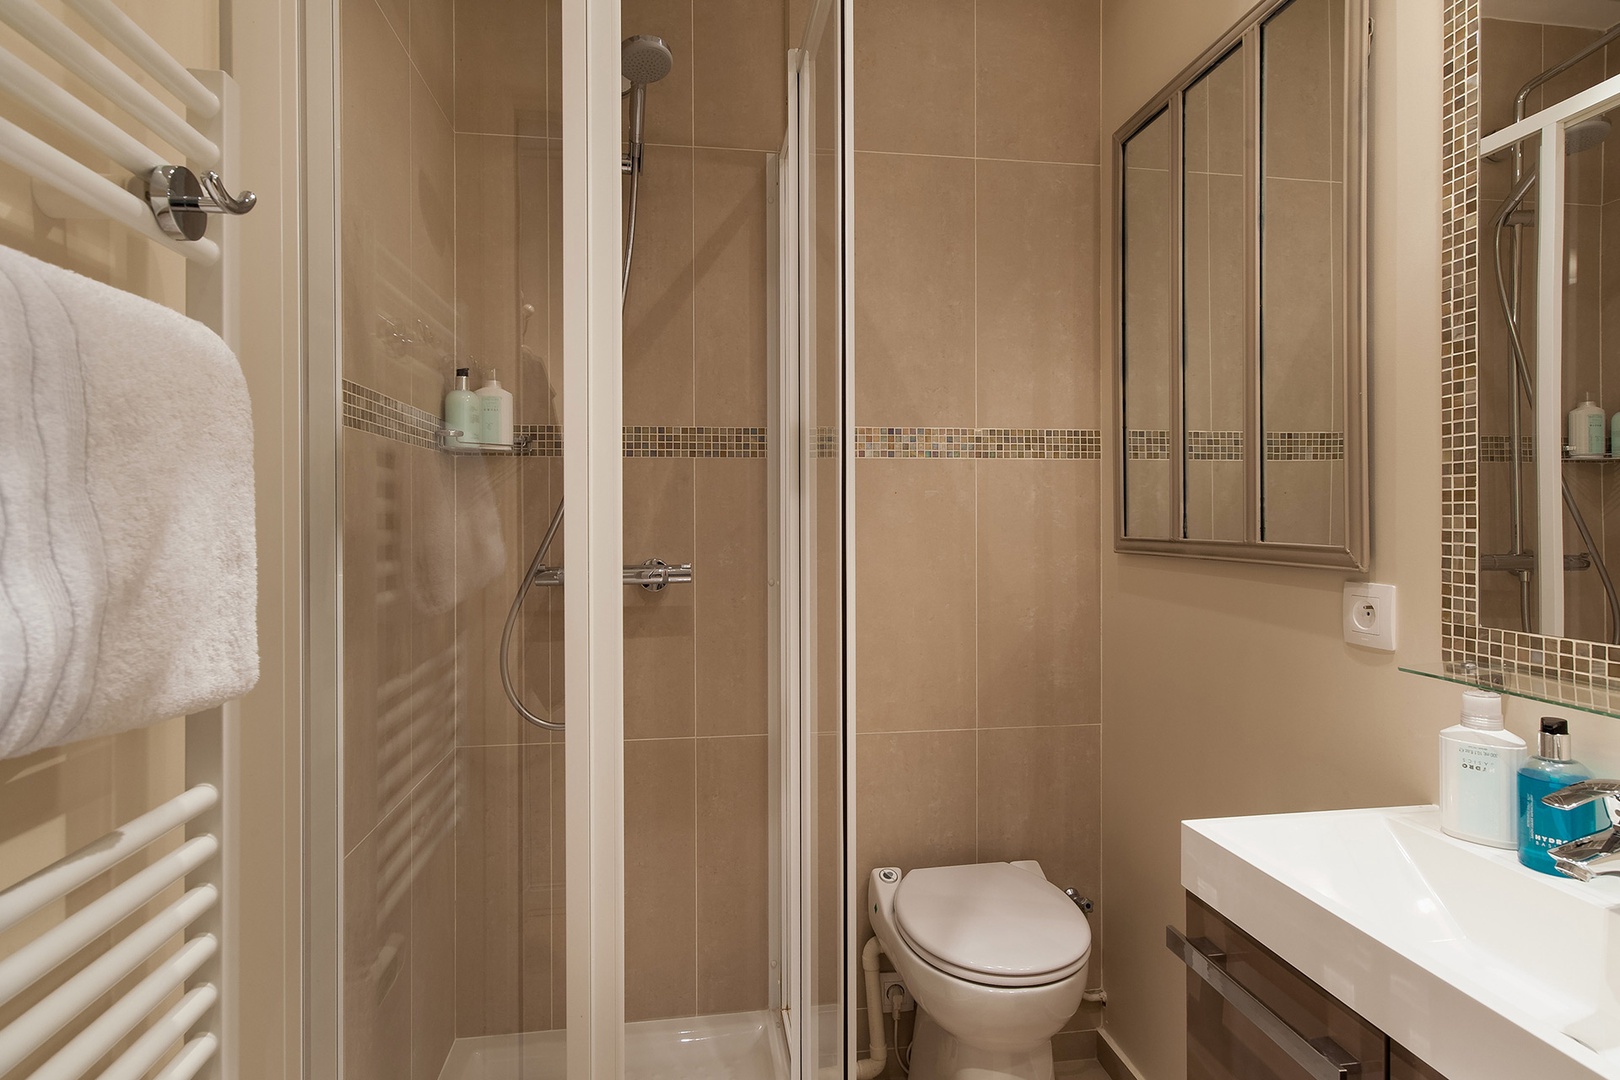 The luxurious bathroom is equipped with a shower, toilet and sink.